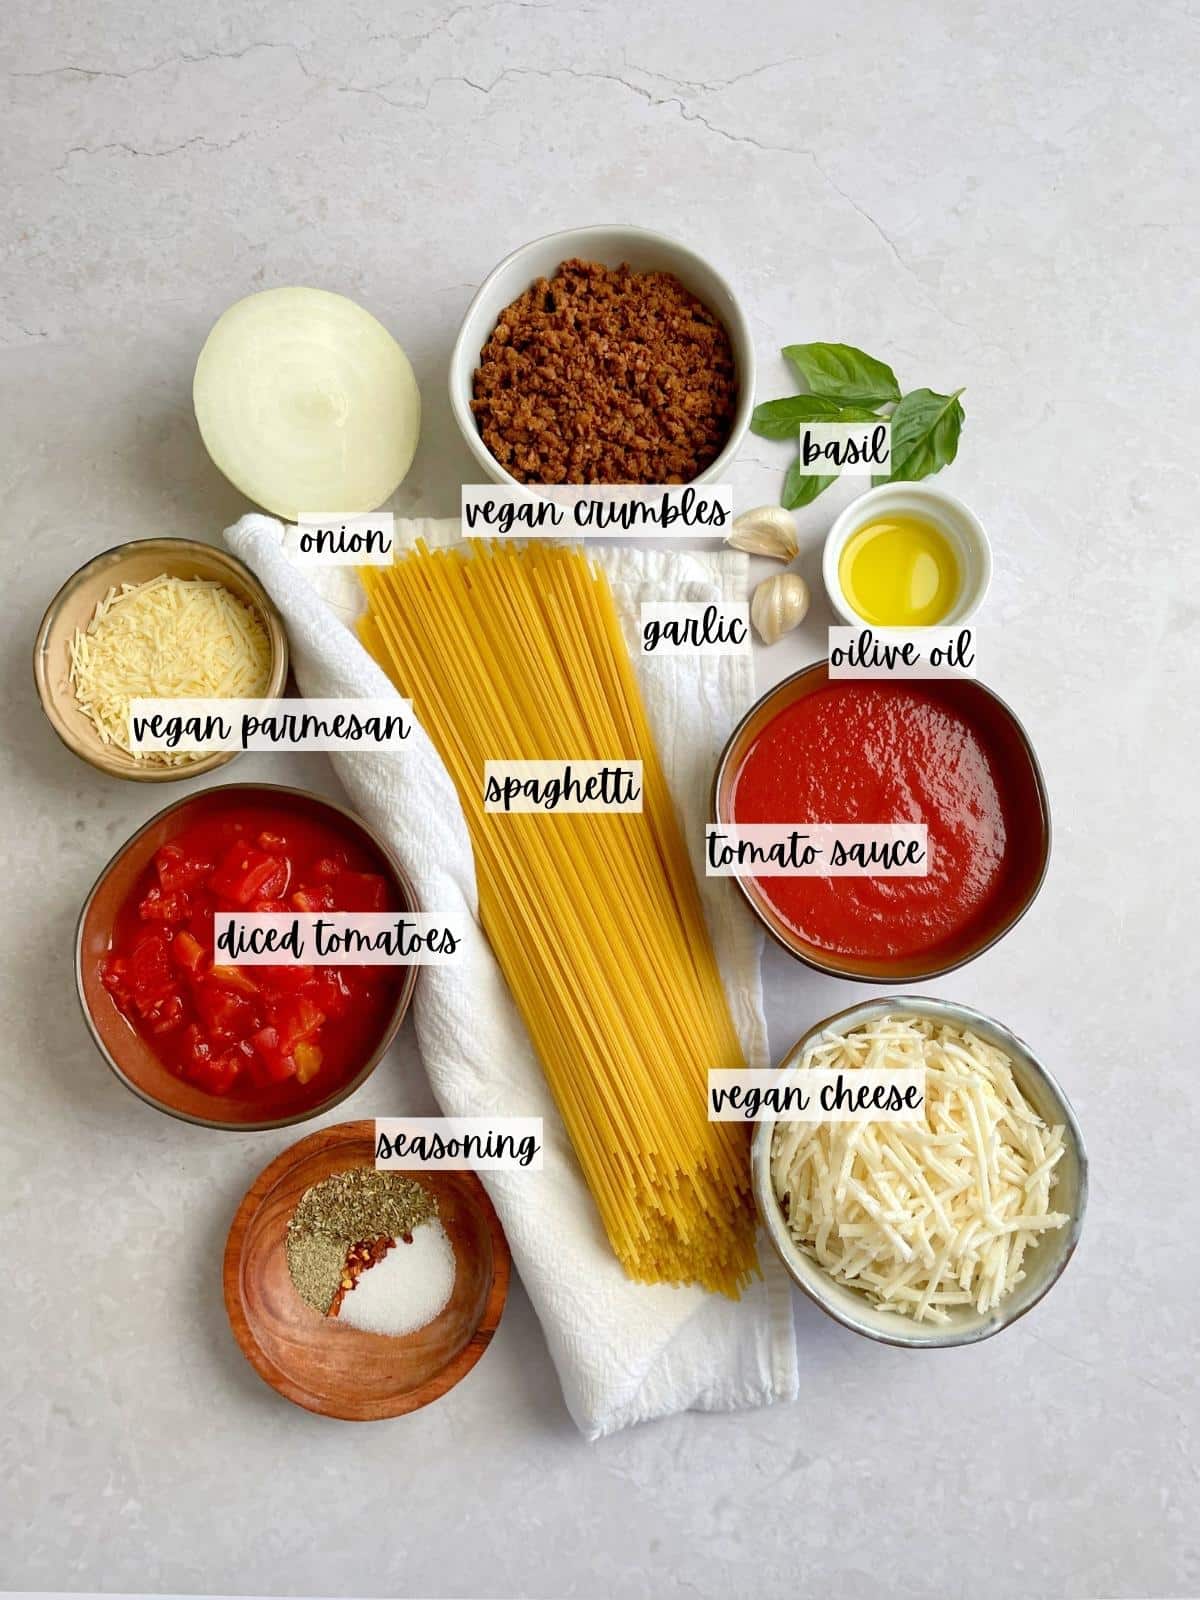 Labeled ingredients for the pasta bake.